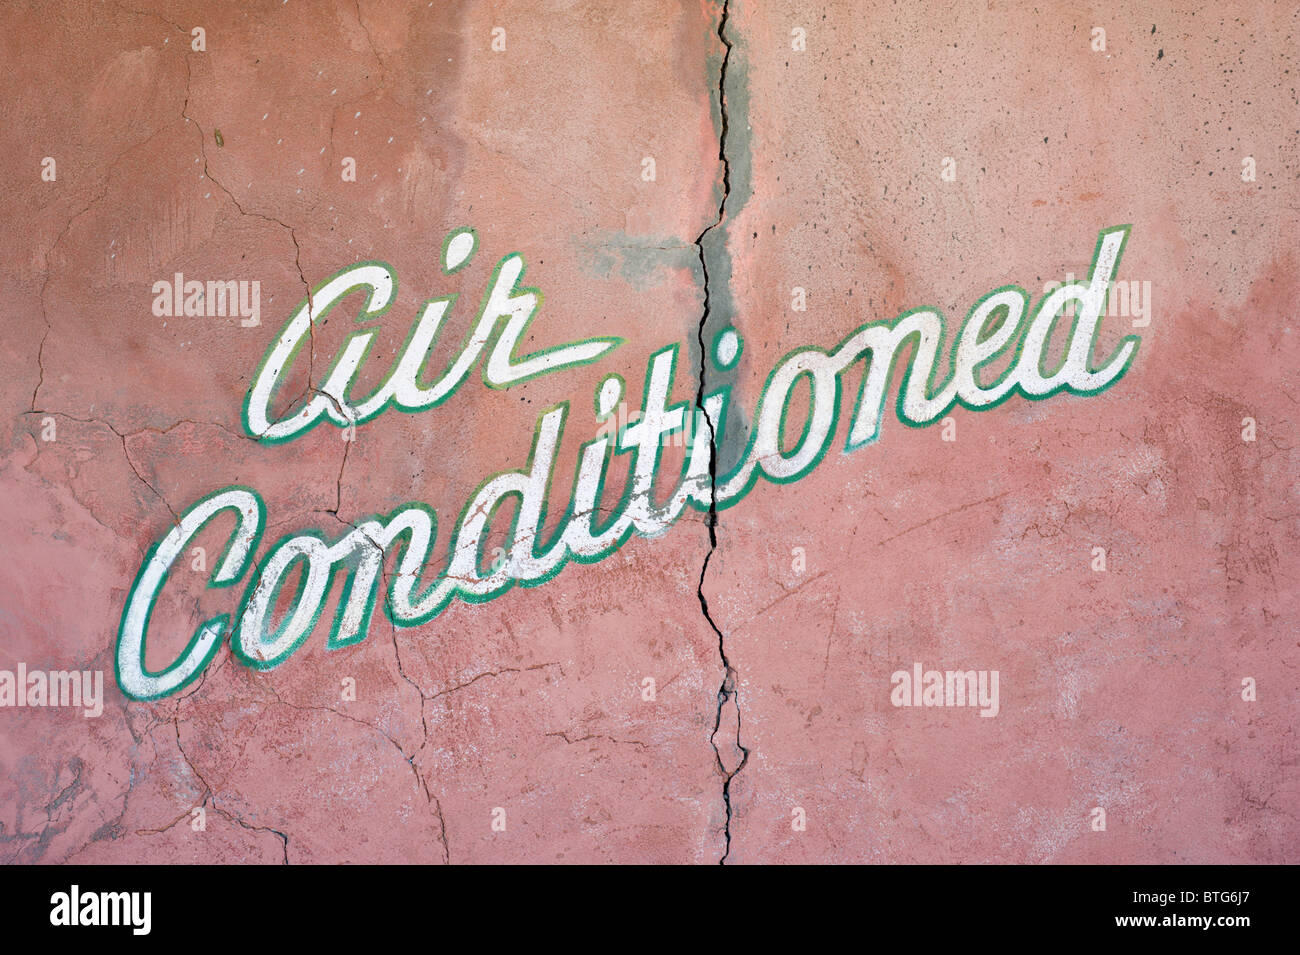 A sign advertises a cooler climate awaits on the inside, in Carrizozo, New Mexico. Stock Photo